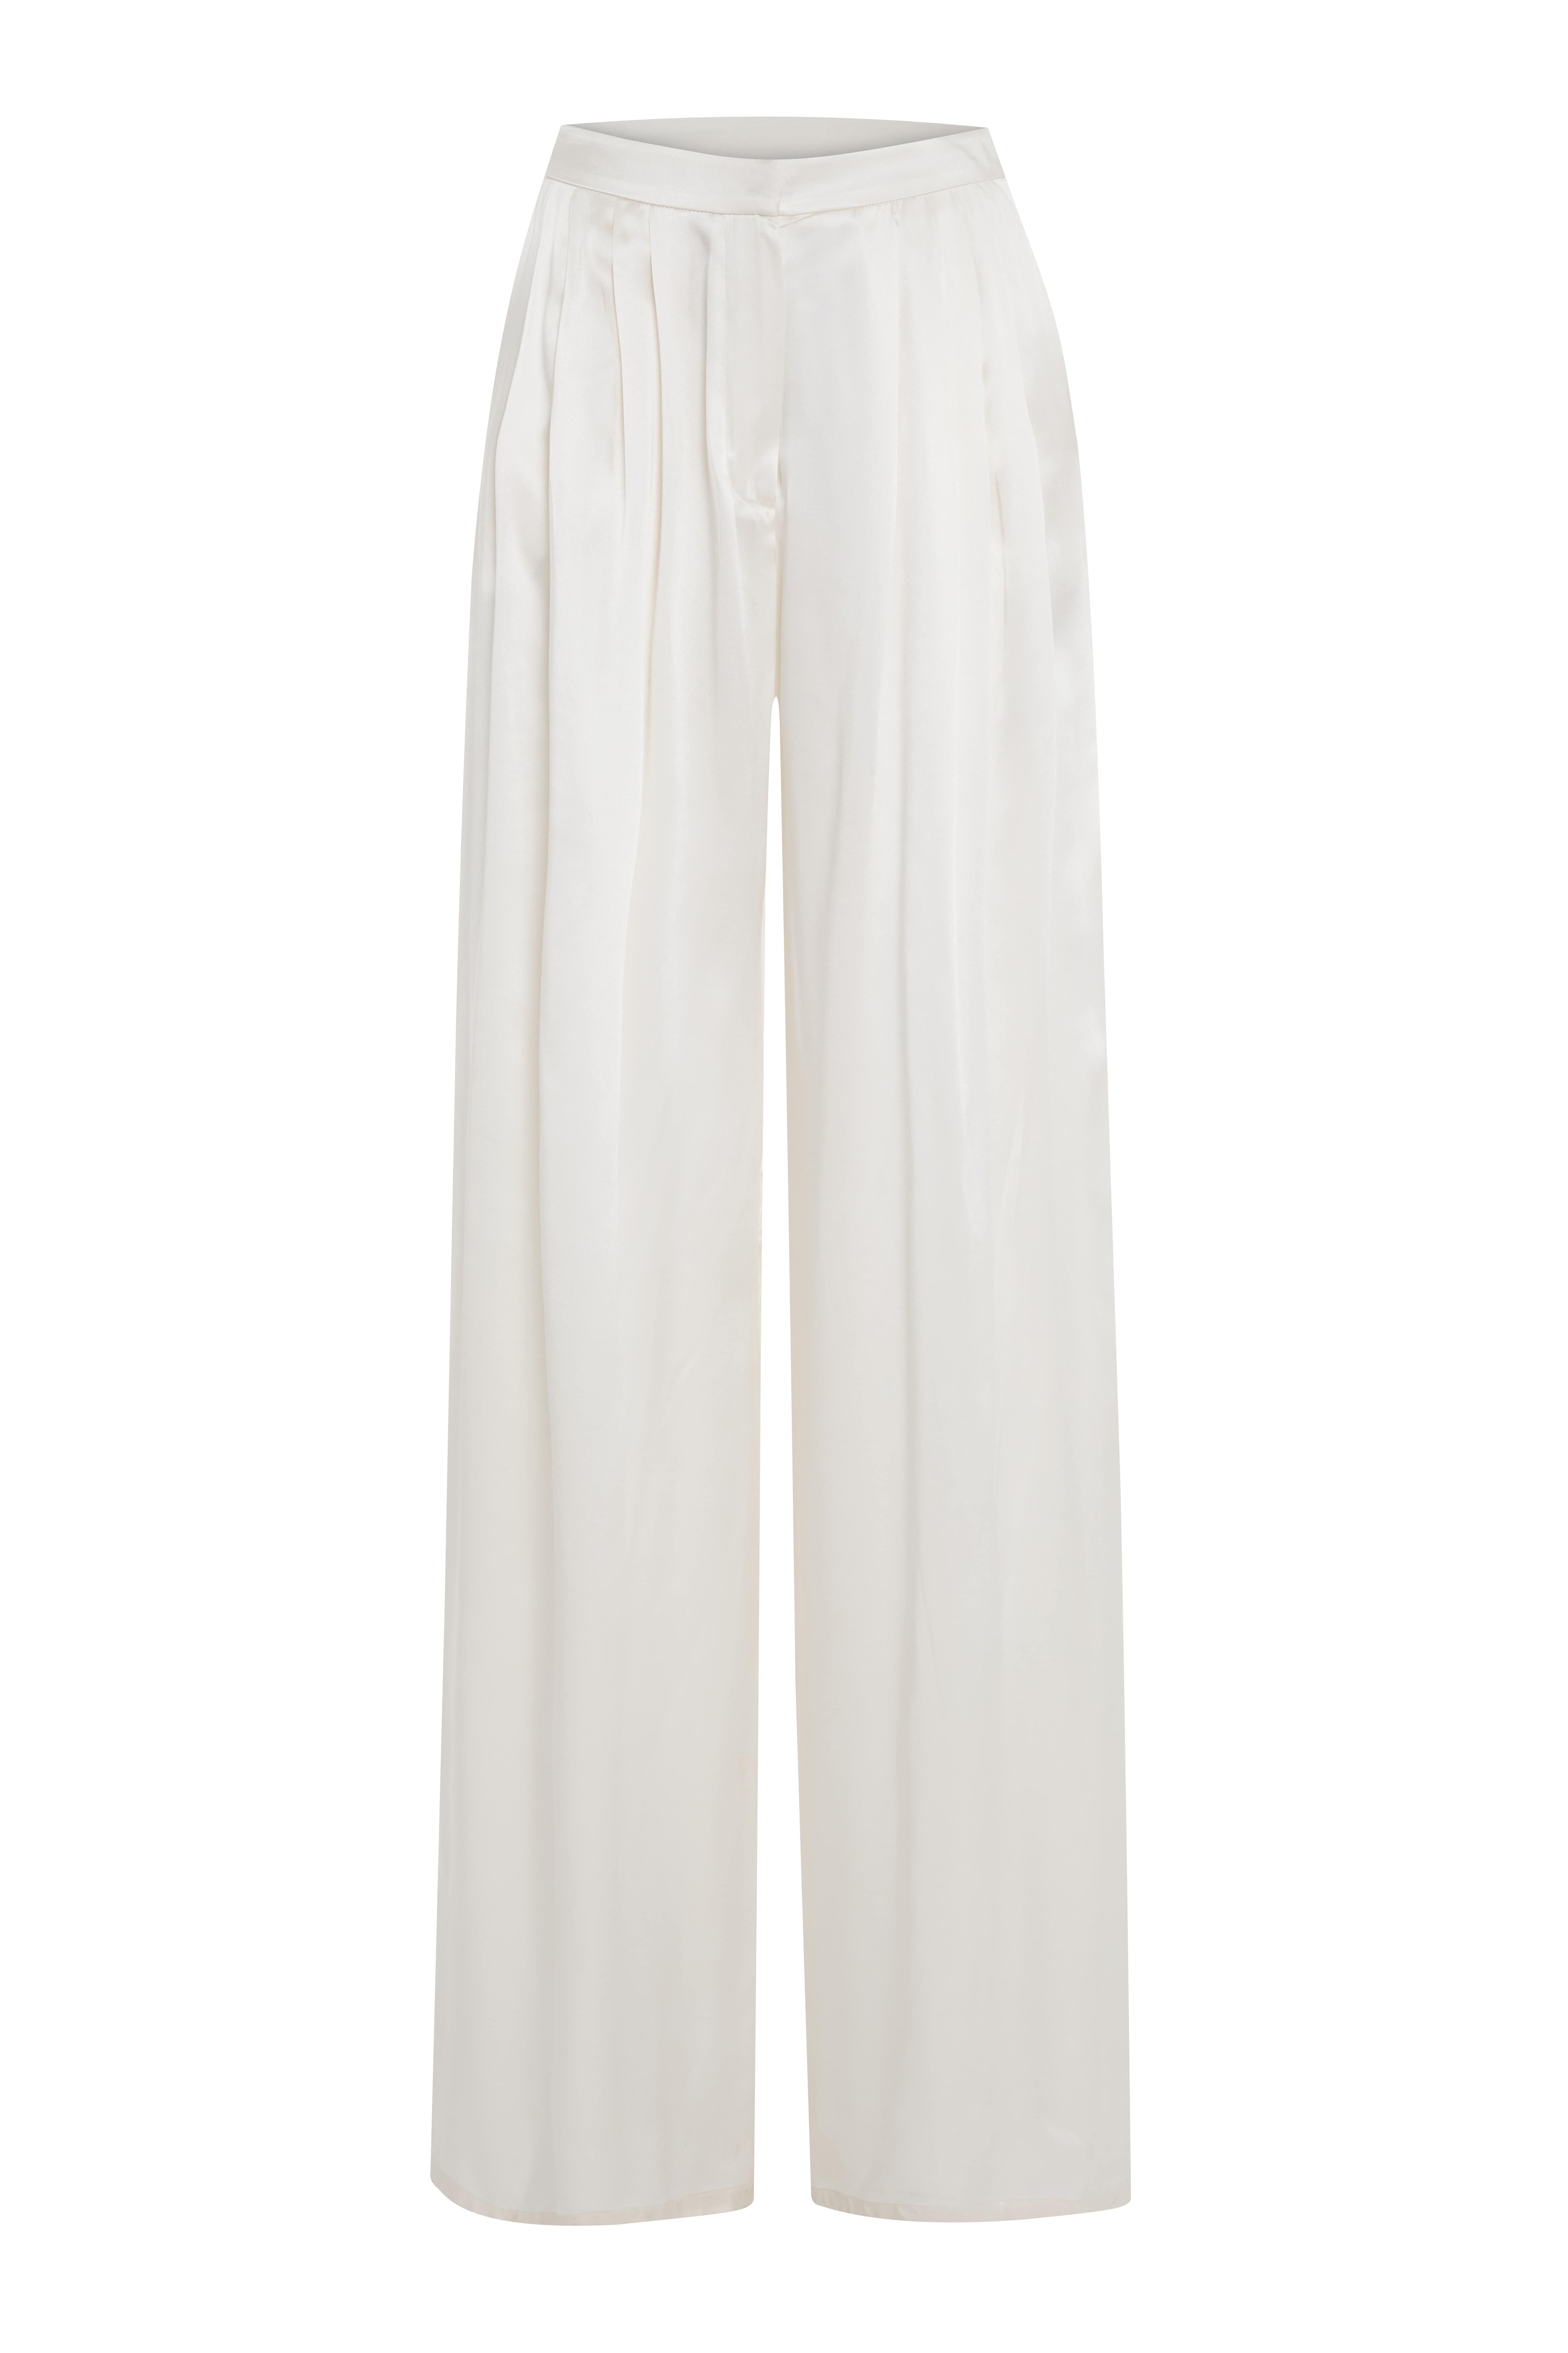 Vivien Limited Edition Trousers - White